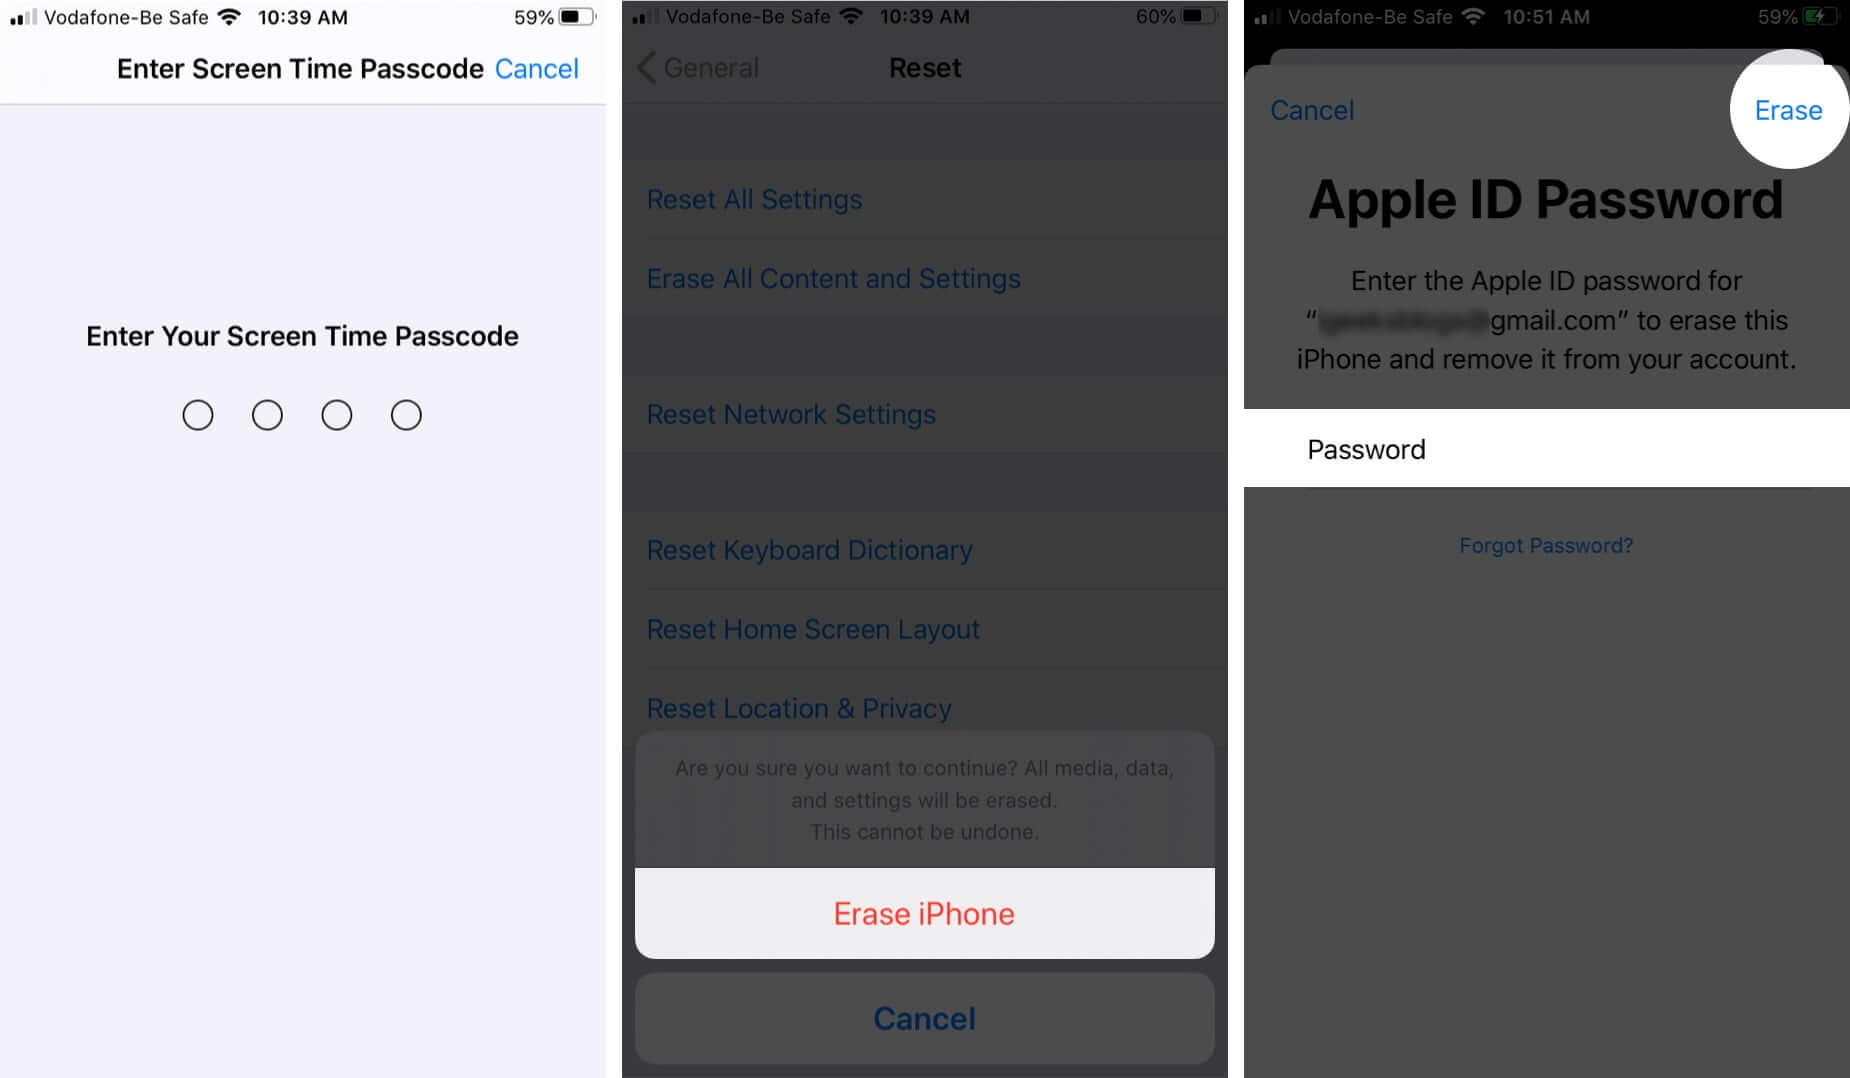 use screen time passcode tap on erase iphone and enter apple id password and tap on erase